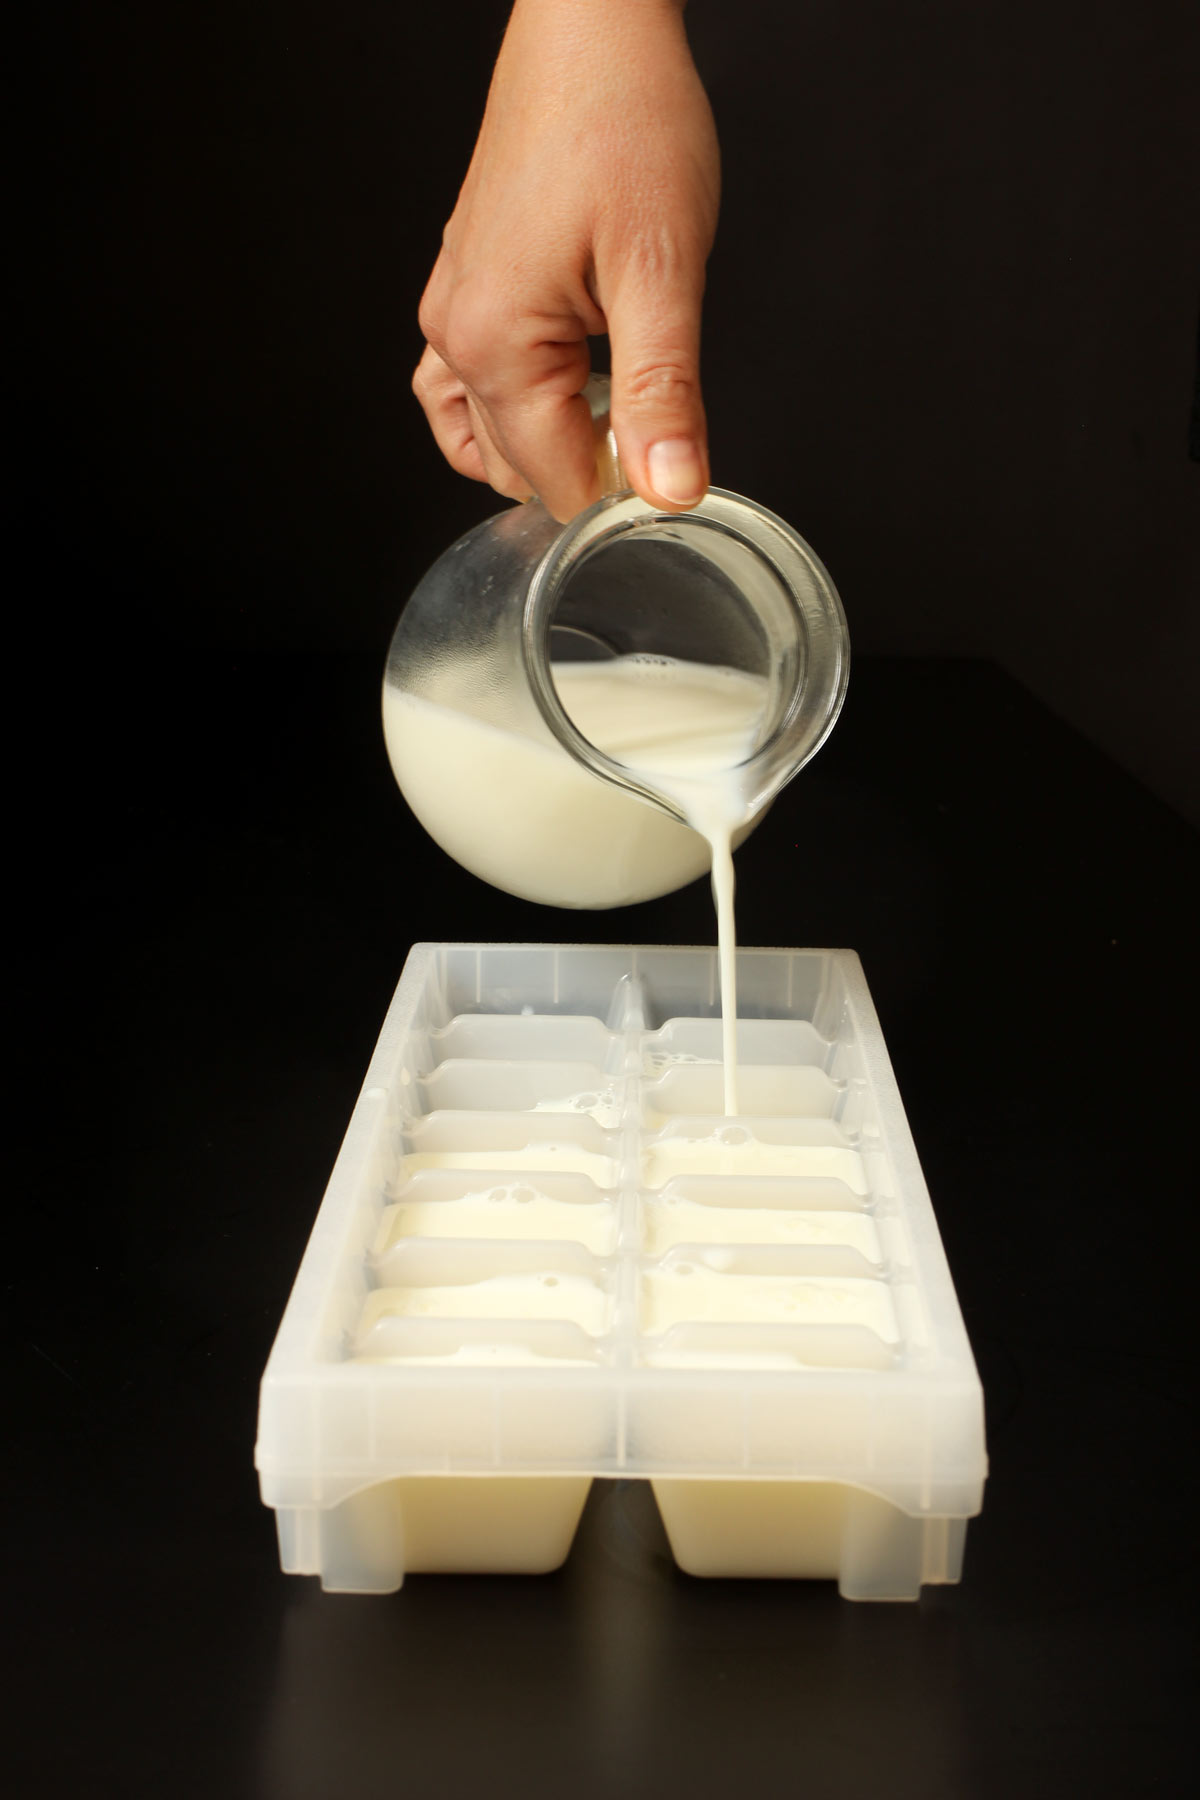 pouring milk into ice xube trays from small glass pitcher.